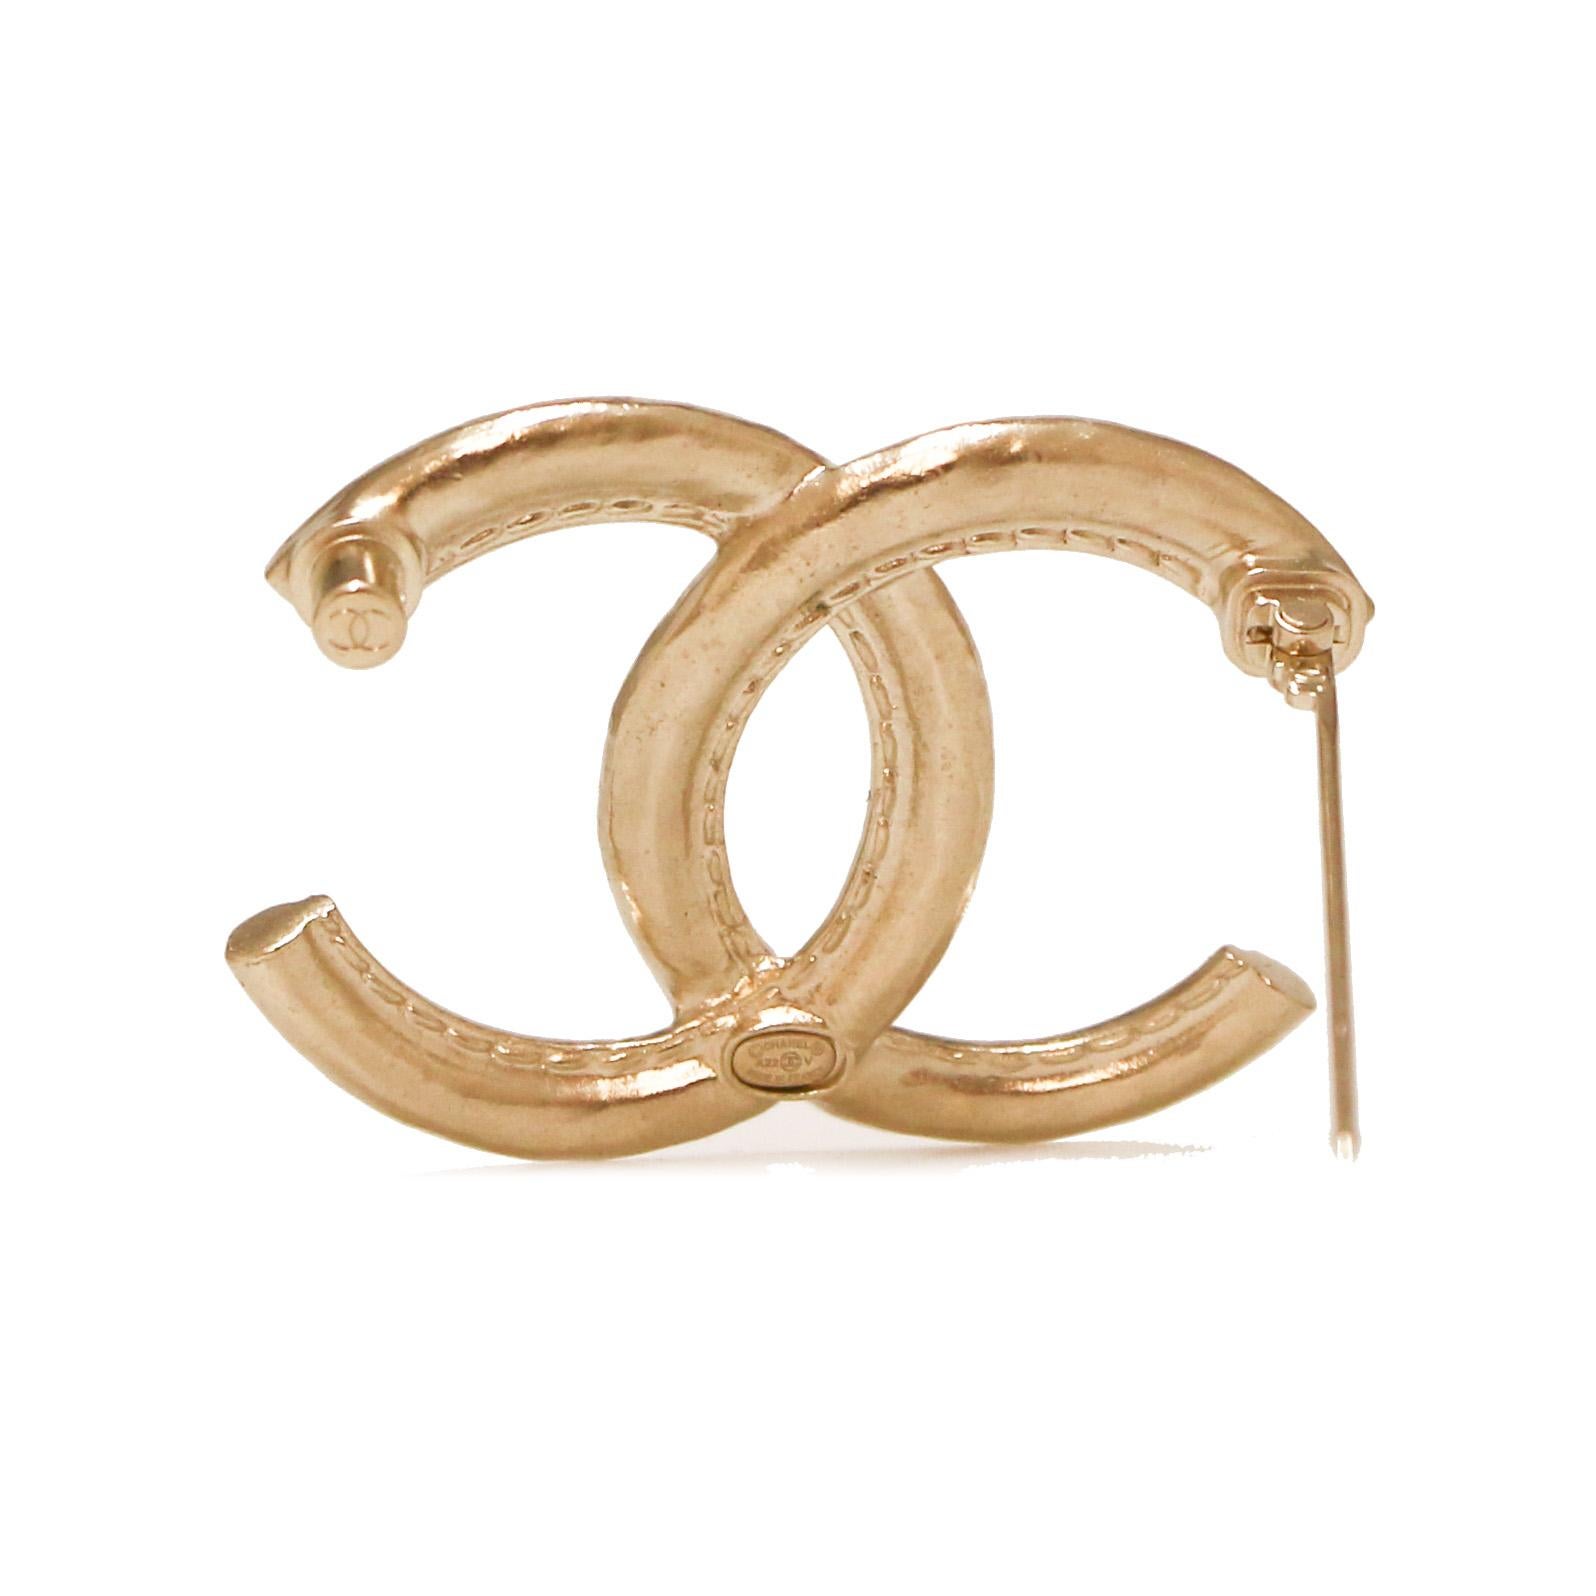 Stunning gold Chanel CC brooch 
Condition : excellent
Made in France
Material : gold plated metal
Color : golden
Dimensions : 5 x 3 cm
Hardware : gold plated metal
Stamp : yes
Year : autumn winter 2022 
Details : iconic CC with small details on the